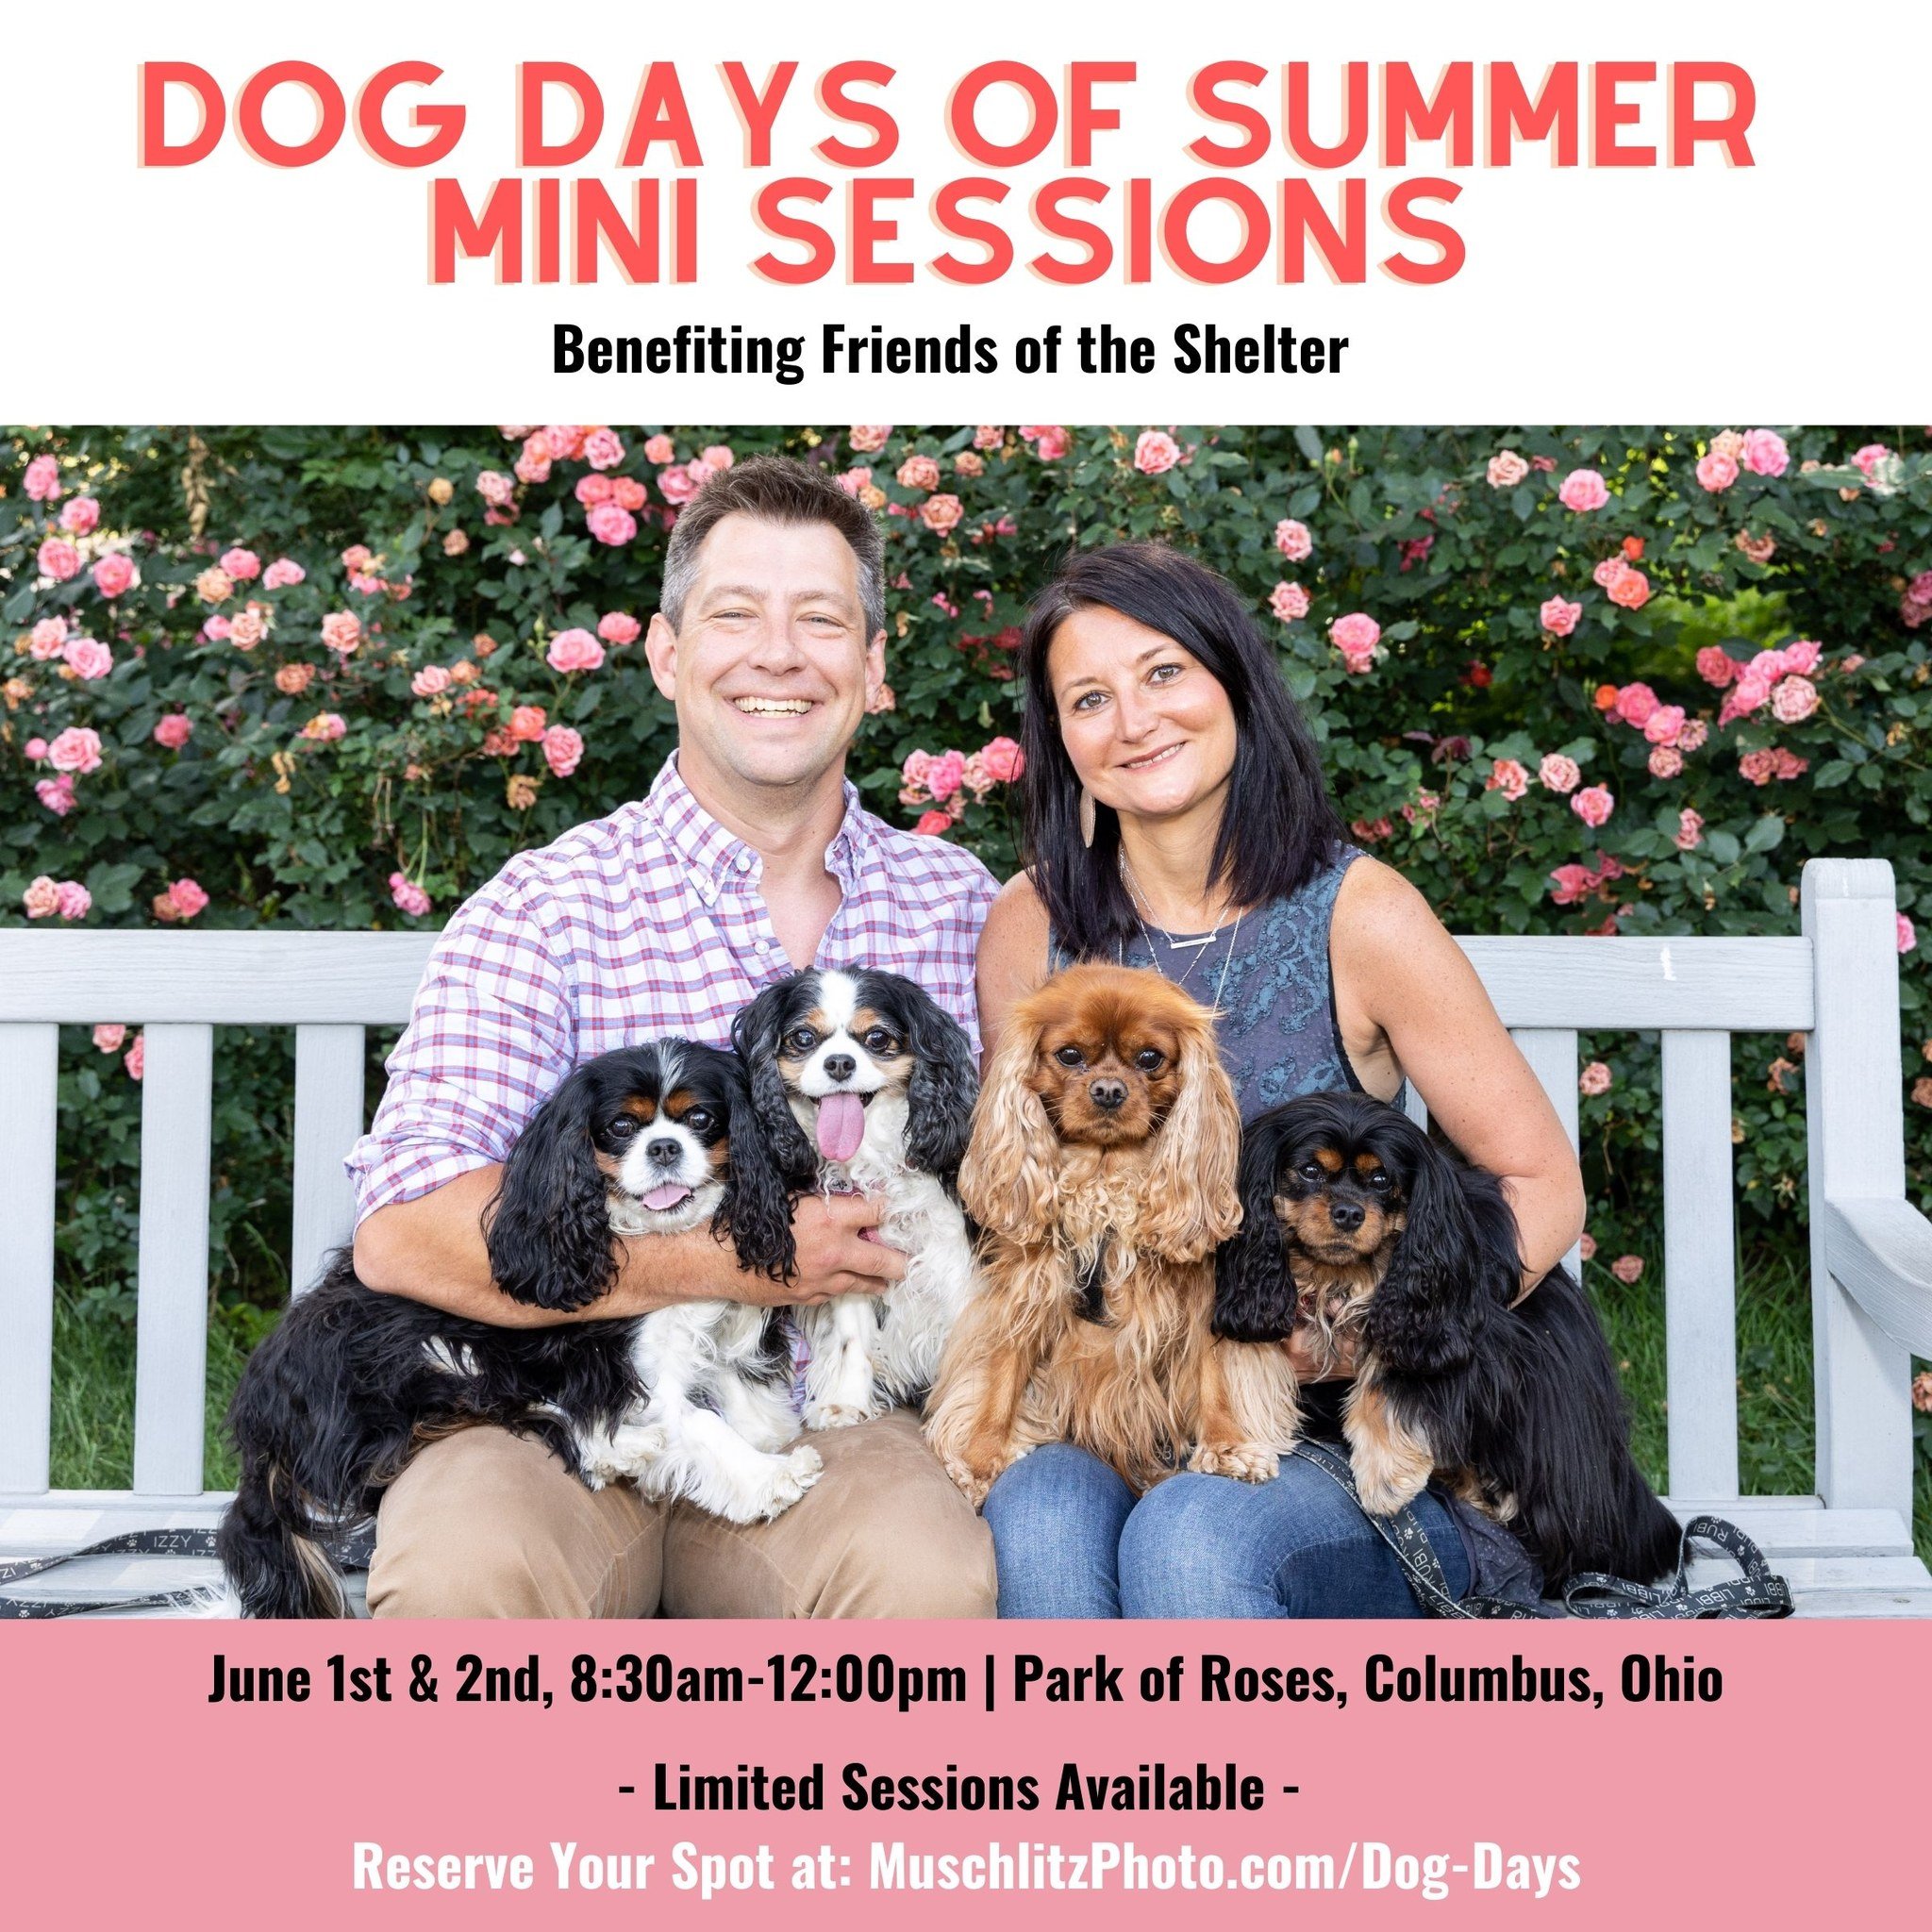 Need a last minute gift for the special mom or dog mom in your life? Treat her to a gift she'll treasure forever when you schedule a Mini Session during our Dog Days of Summer Mini Session Fundraiser on June 1st &amp; 2nd! Make memories with those yo